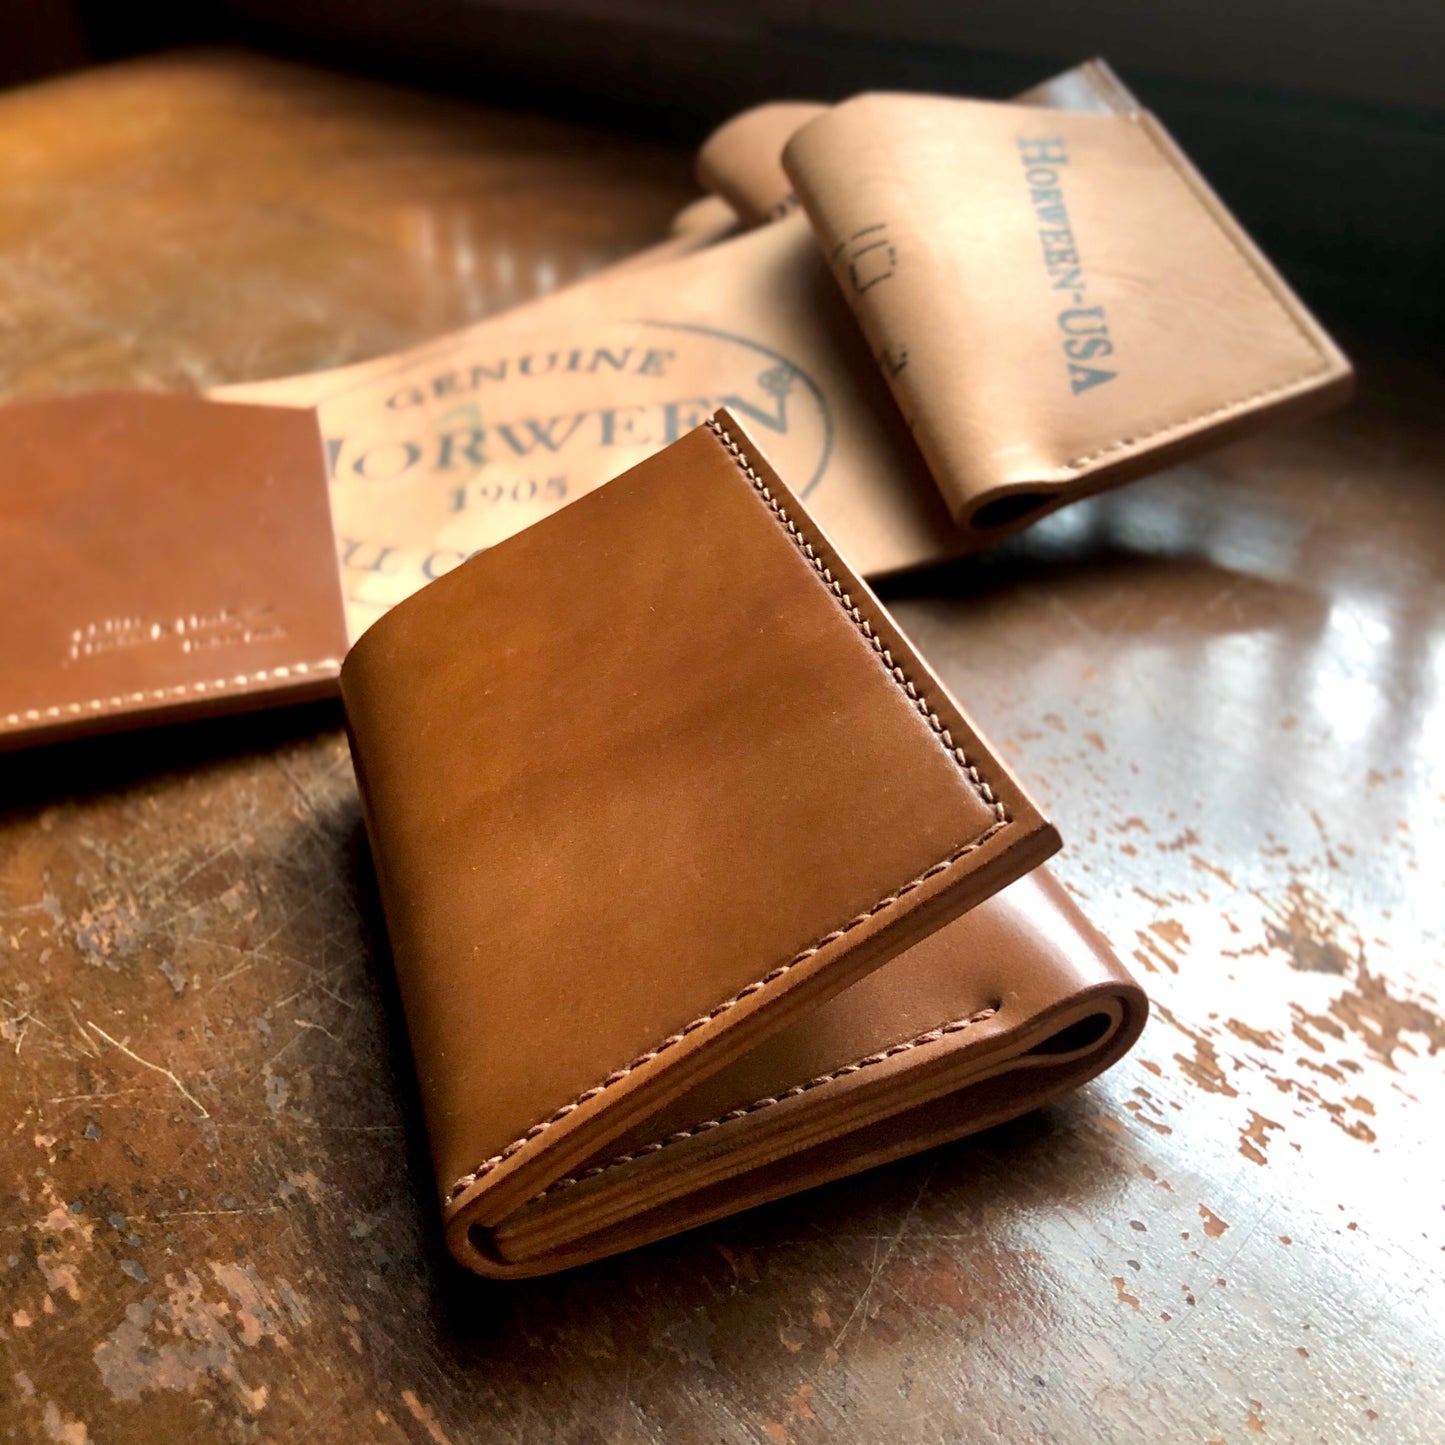 Shell Wallet / Vertical / Palm-Sized Wallet, Trifold【Horween】シェルコードバンのシンプルな三折り財布